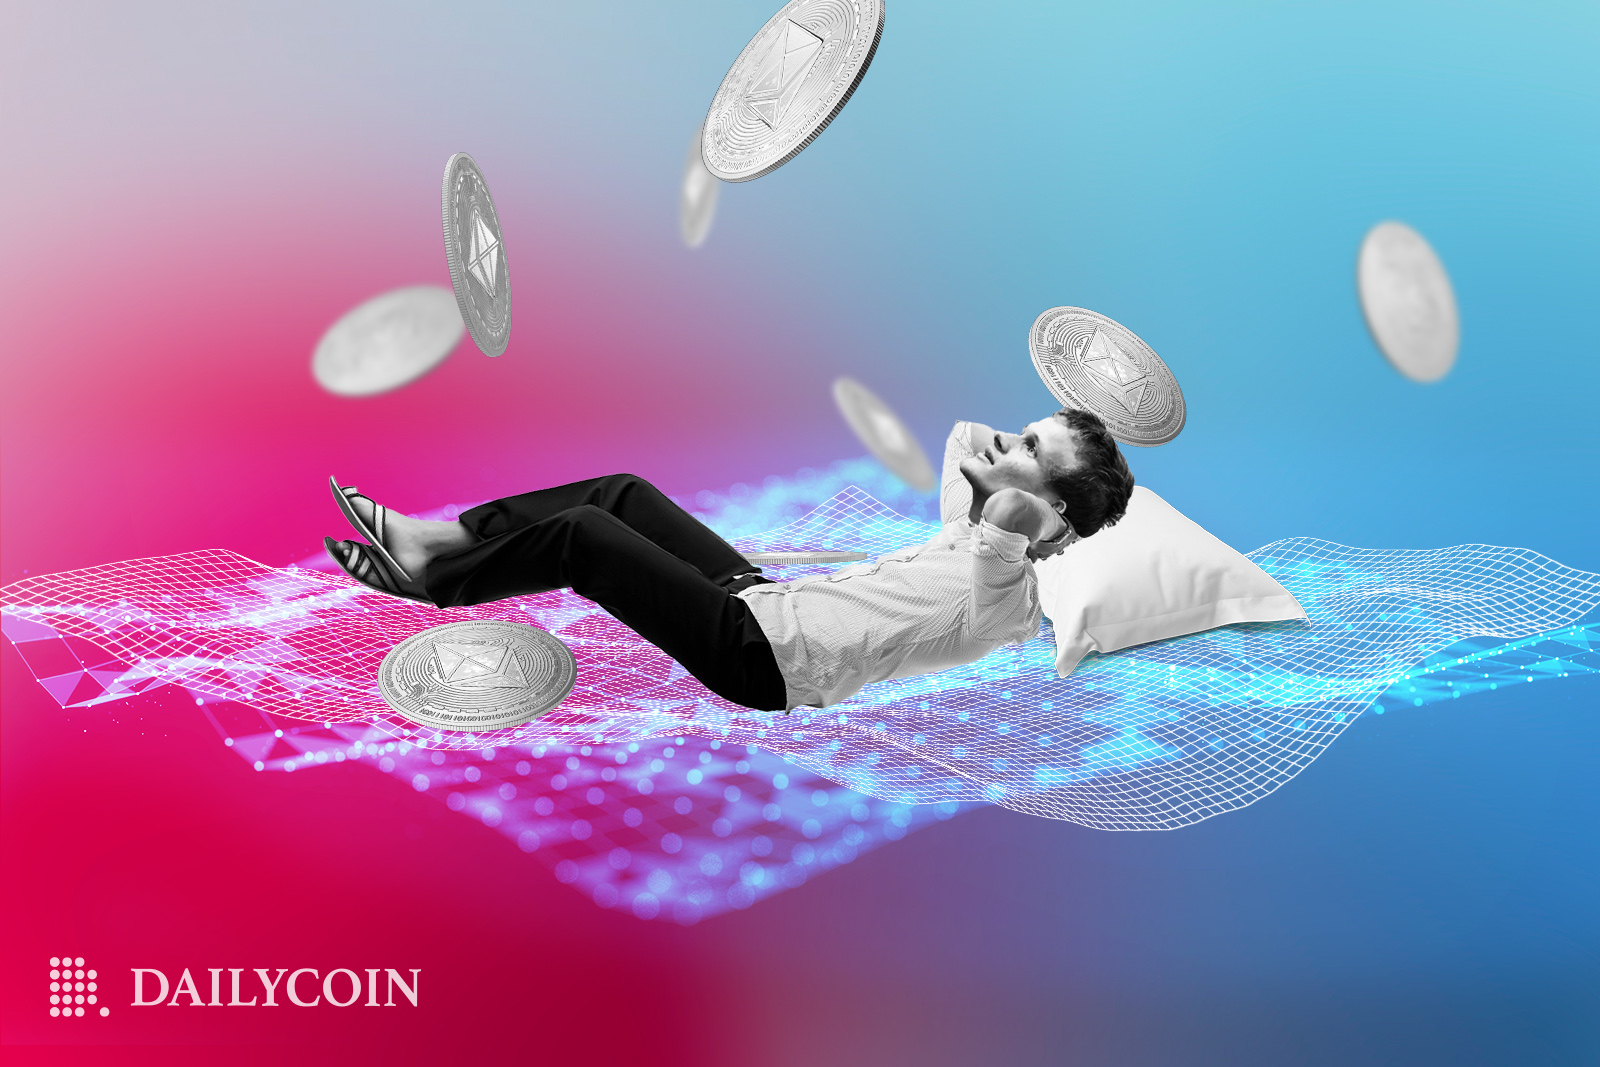 Vitalik Buterin laying down on a pillow with coins floating around him